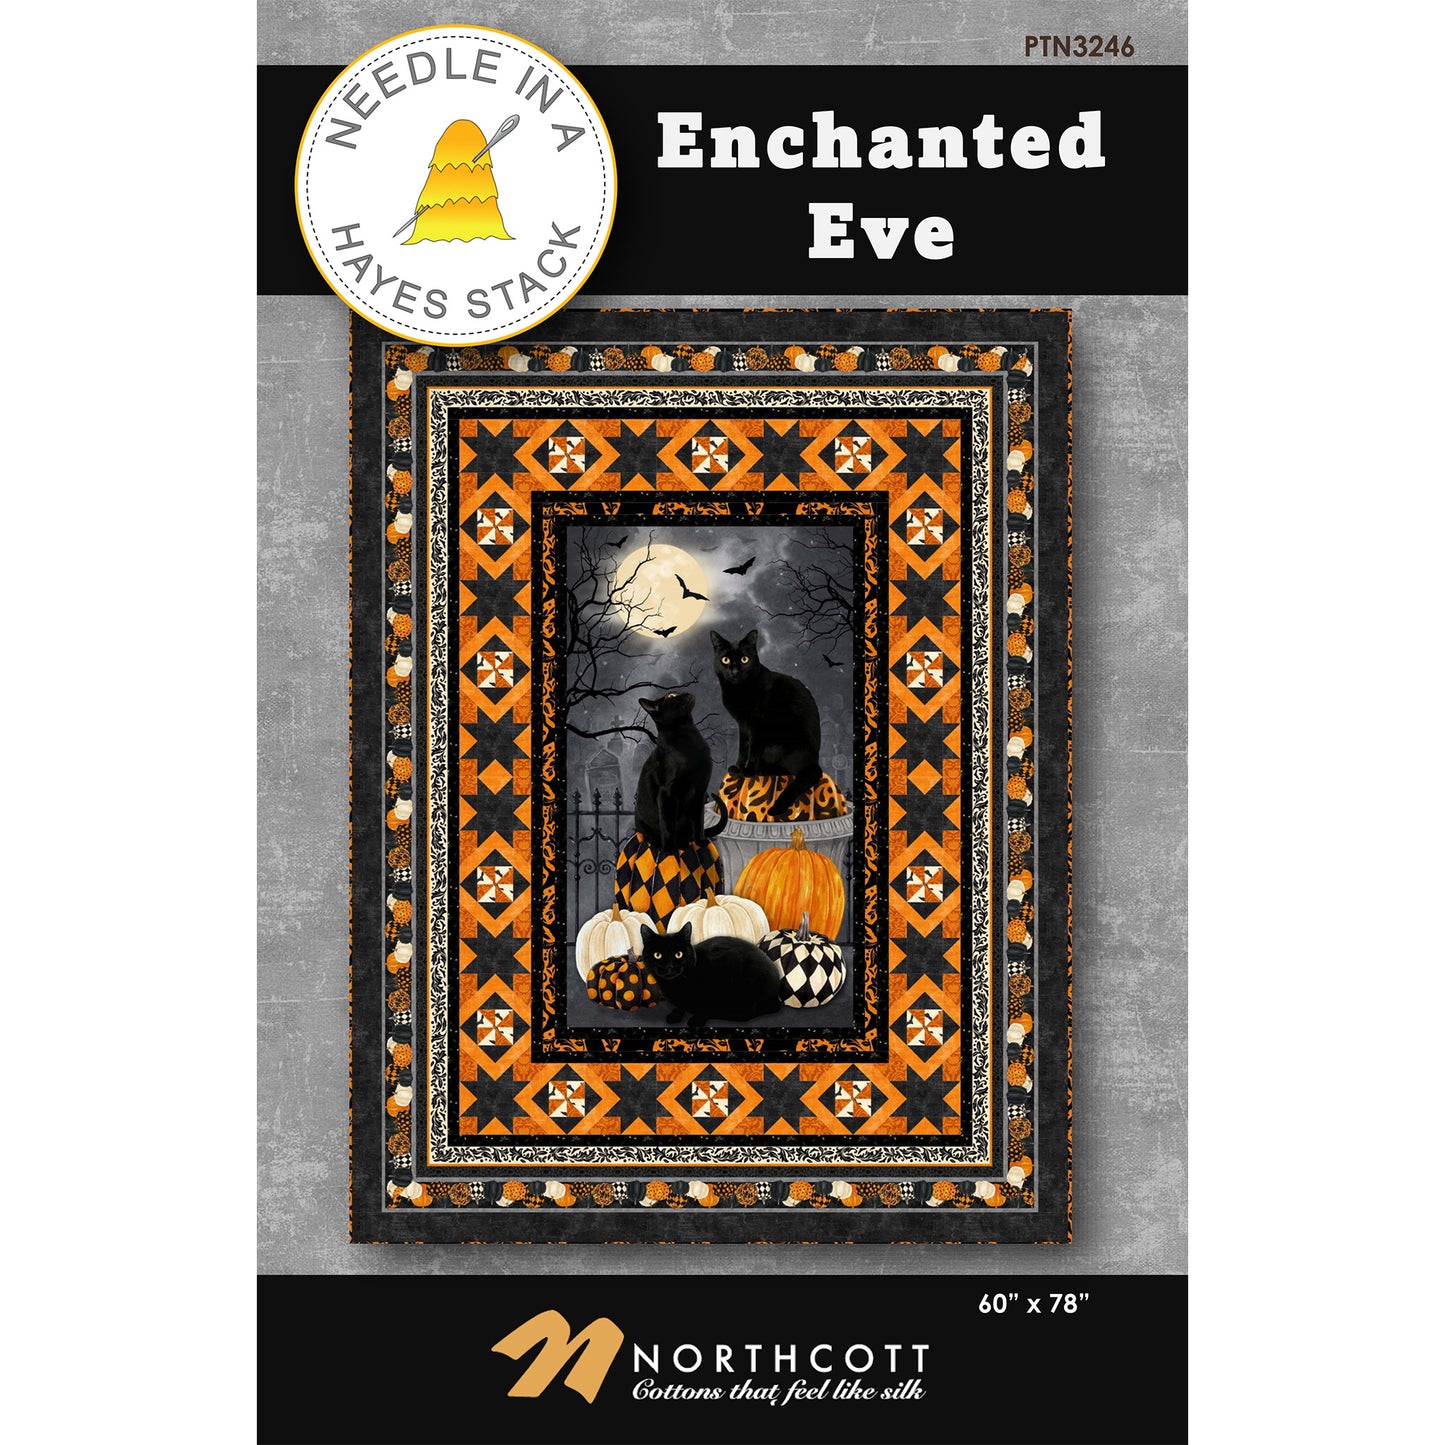 Enchanted Eve Quilt NH-3246e - Downloadable Pattern